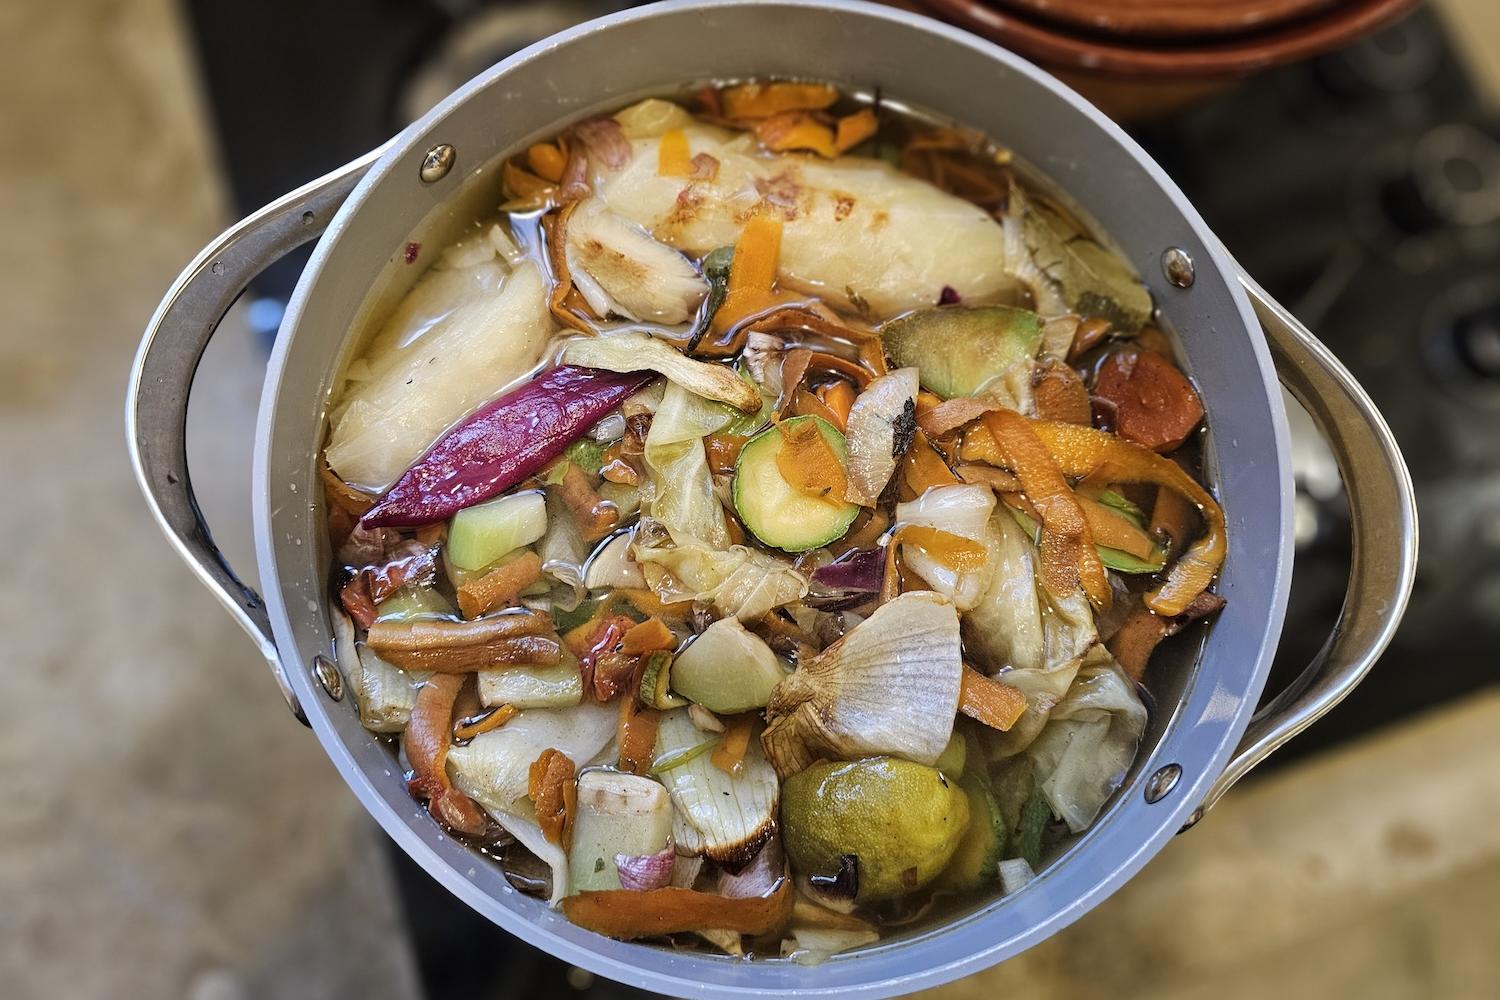 roasted vegetables in a pot with water - how to make vegetable broth from vegetable scraps